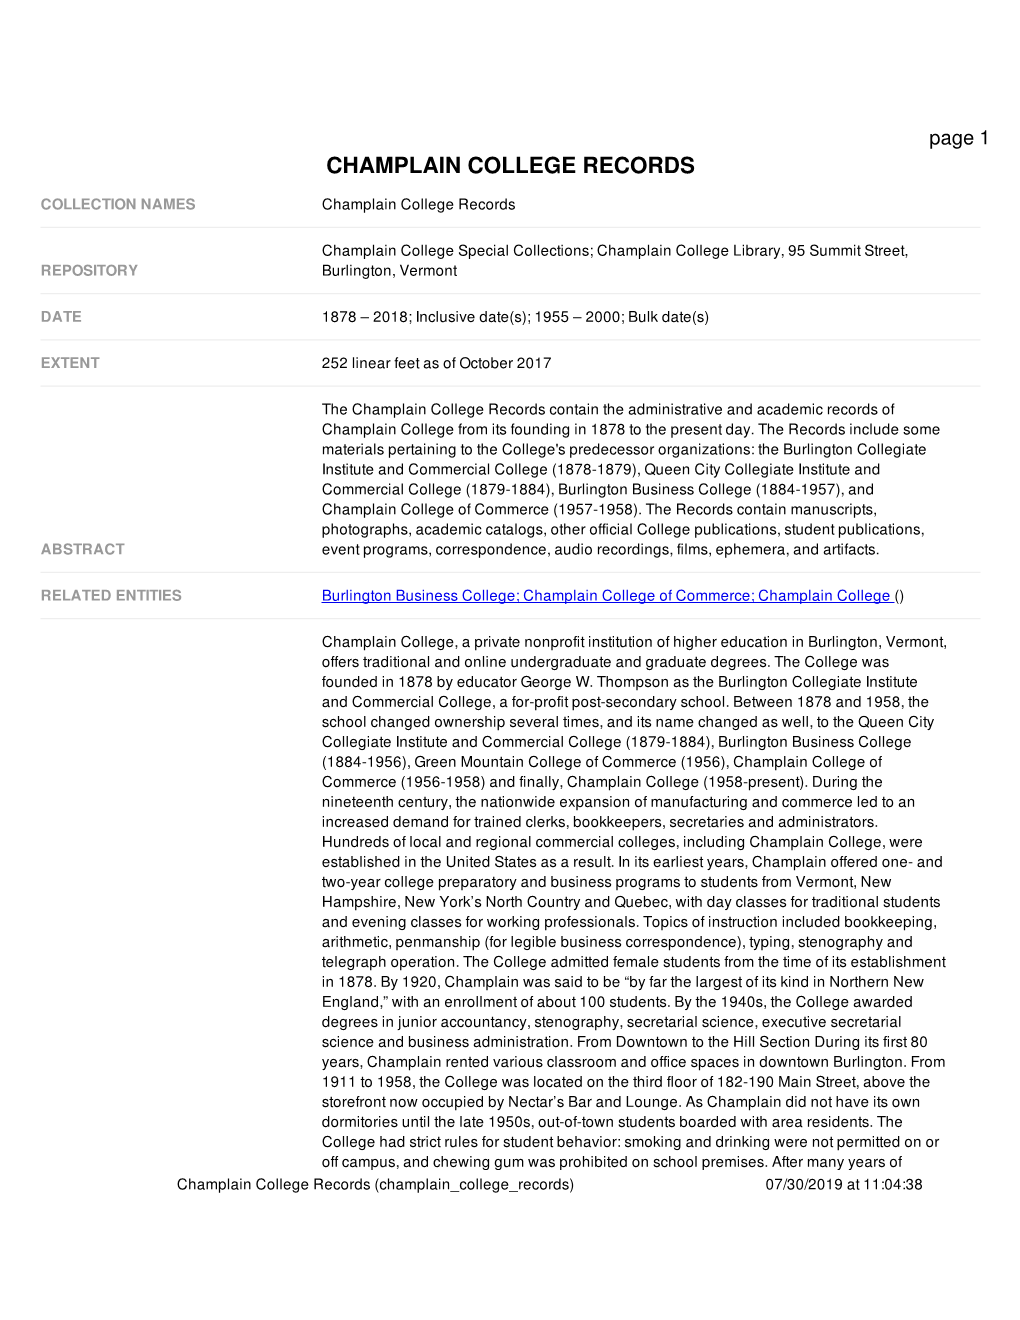 Summary for Champlain College Records